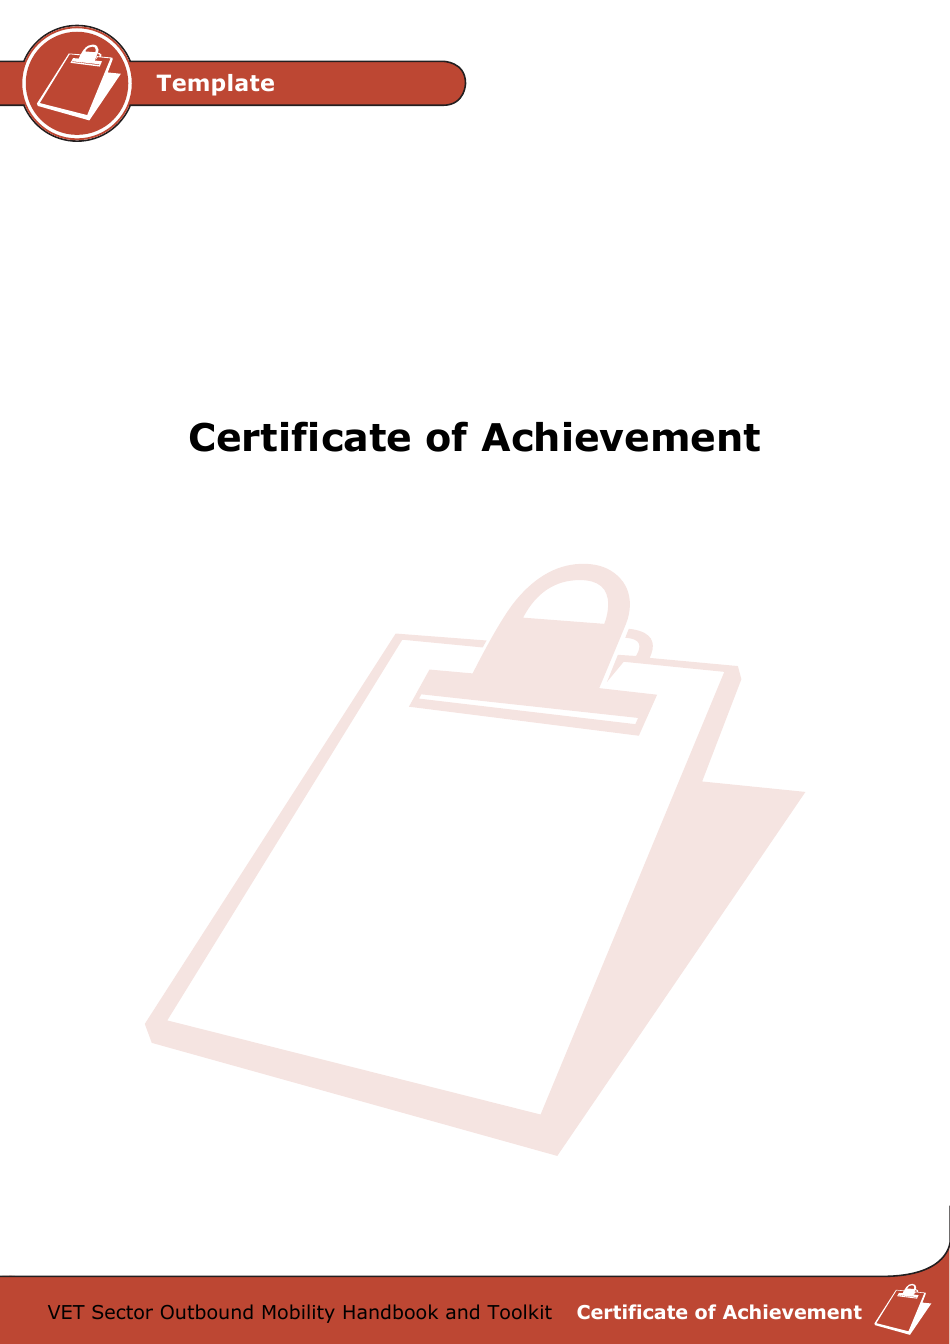 Certificate of Achievement Template - Vet Sector Outbound Mobility Handbook and Toolkit